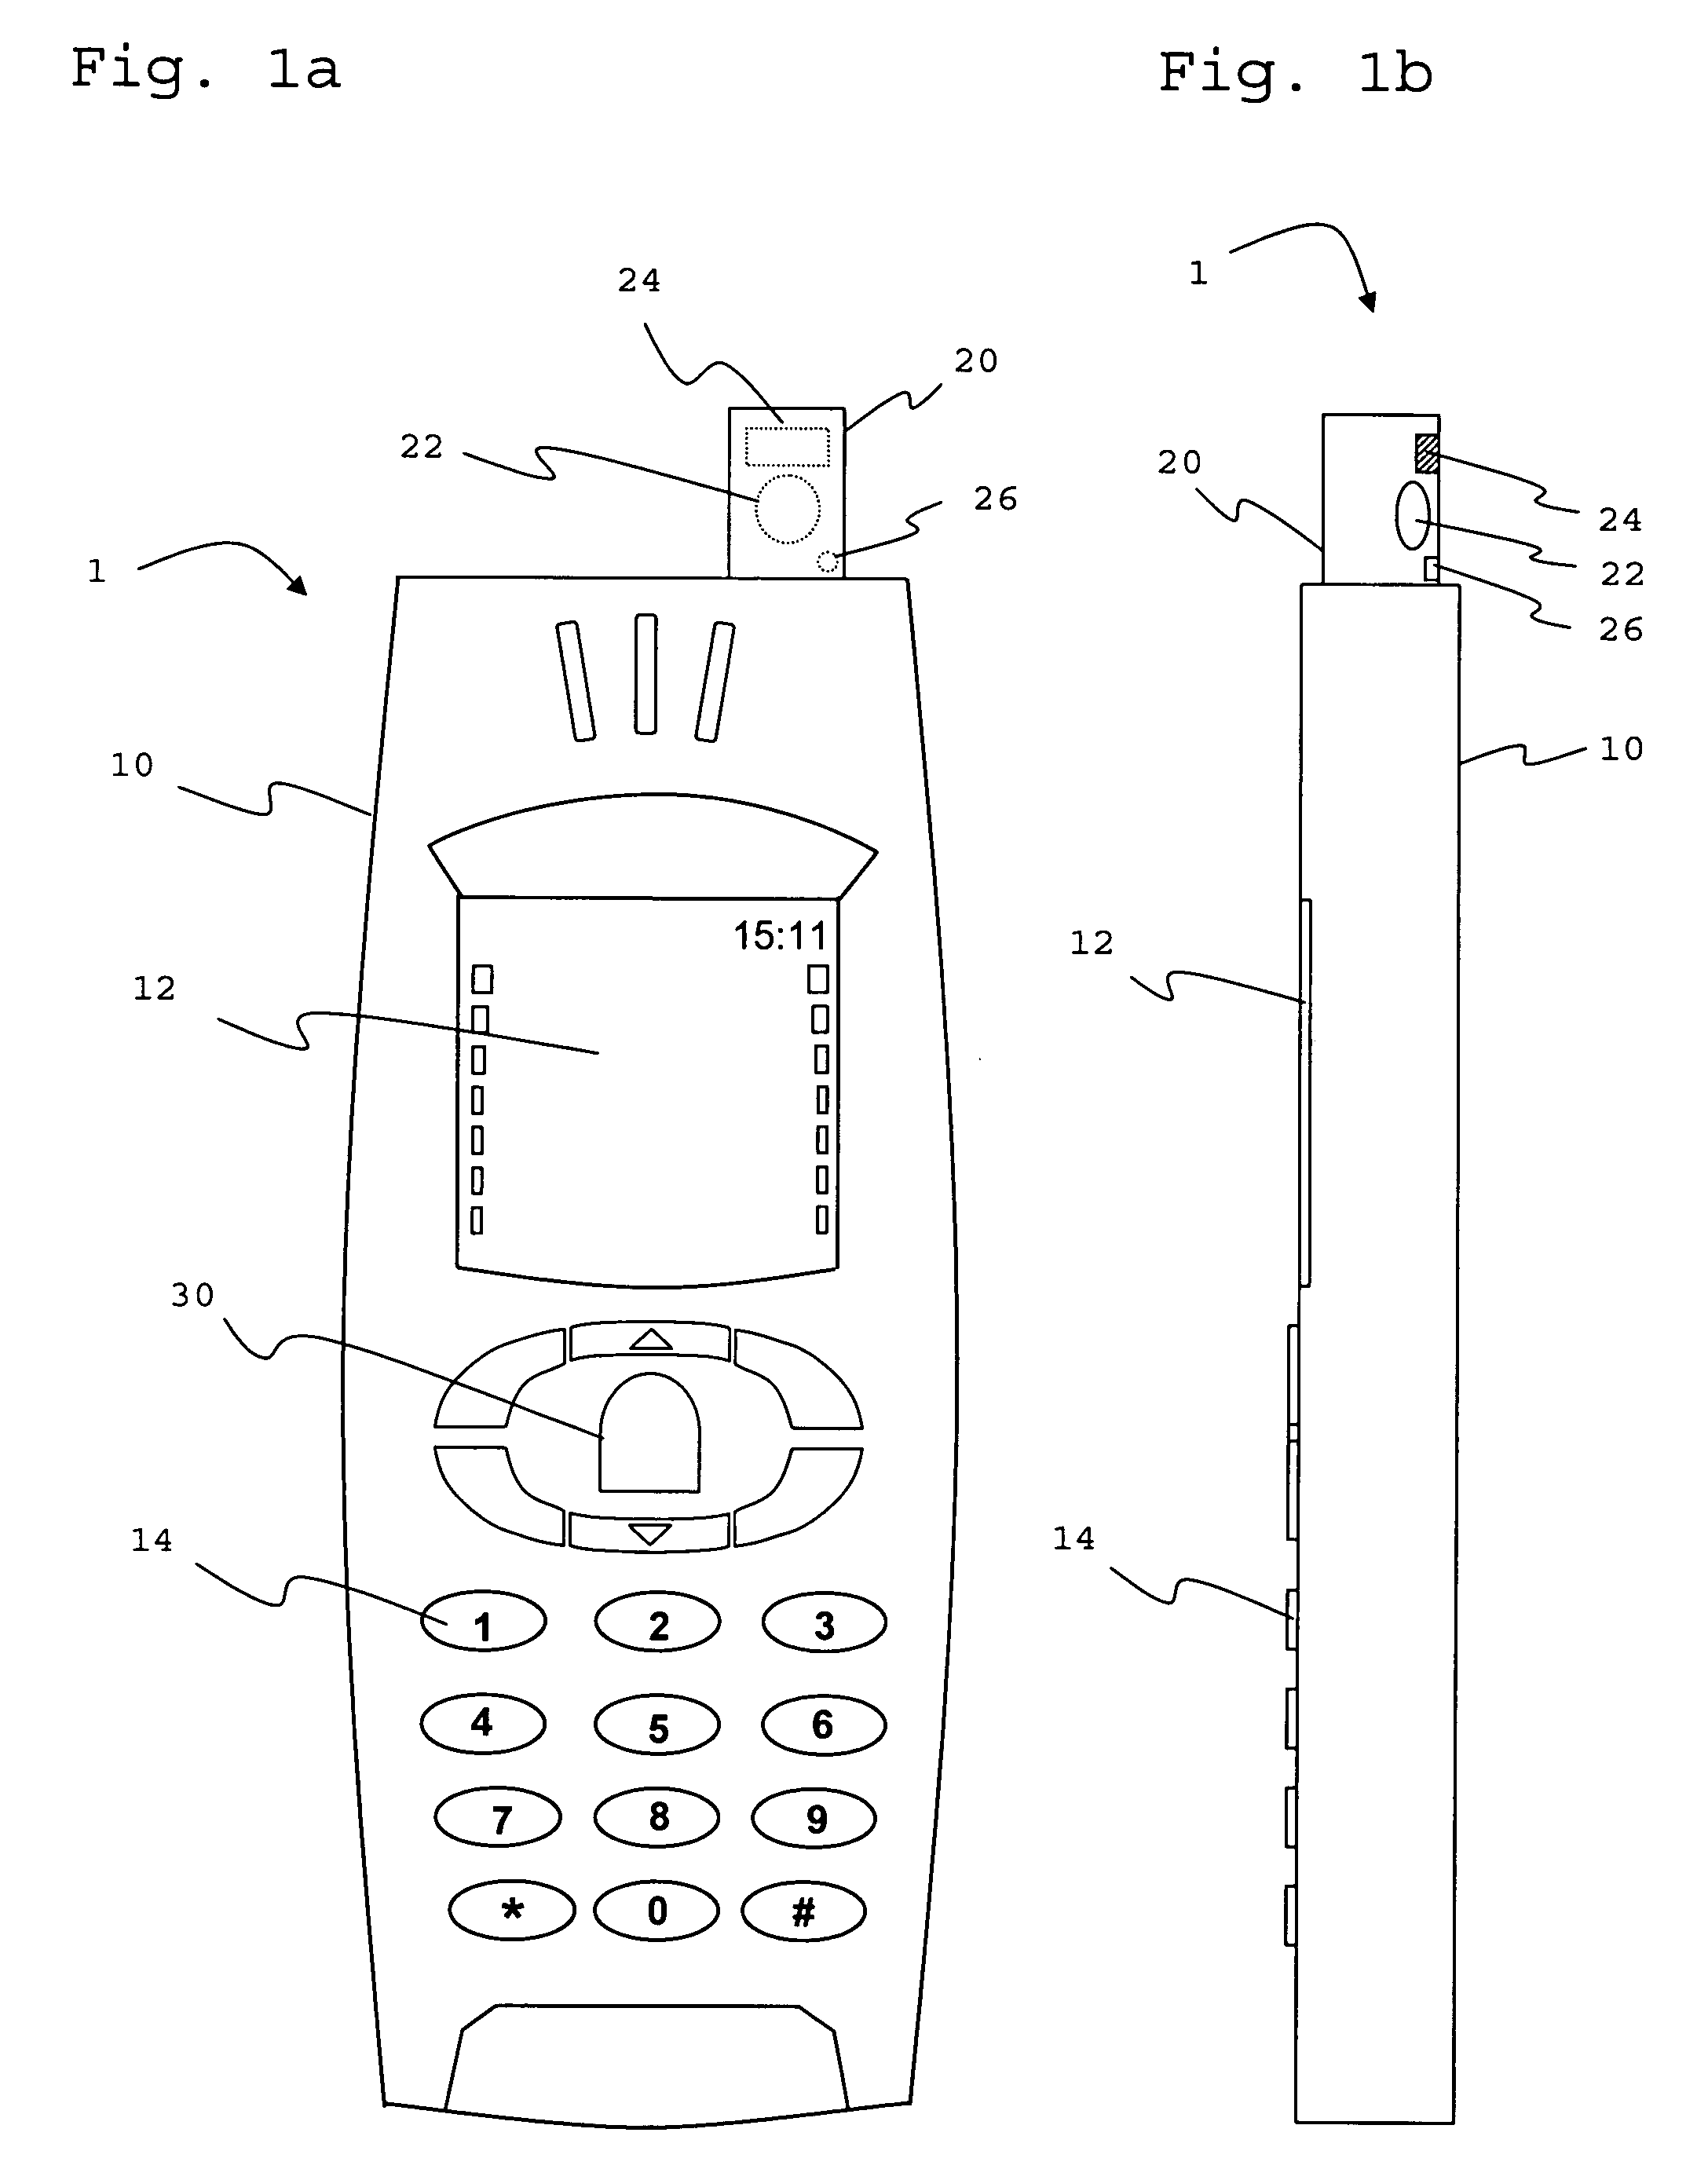 Authenticating data units of a mobile communications device